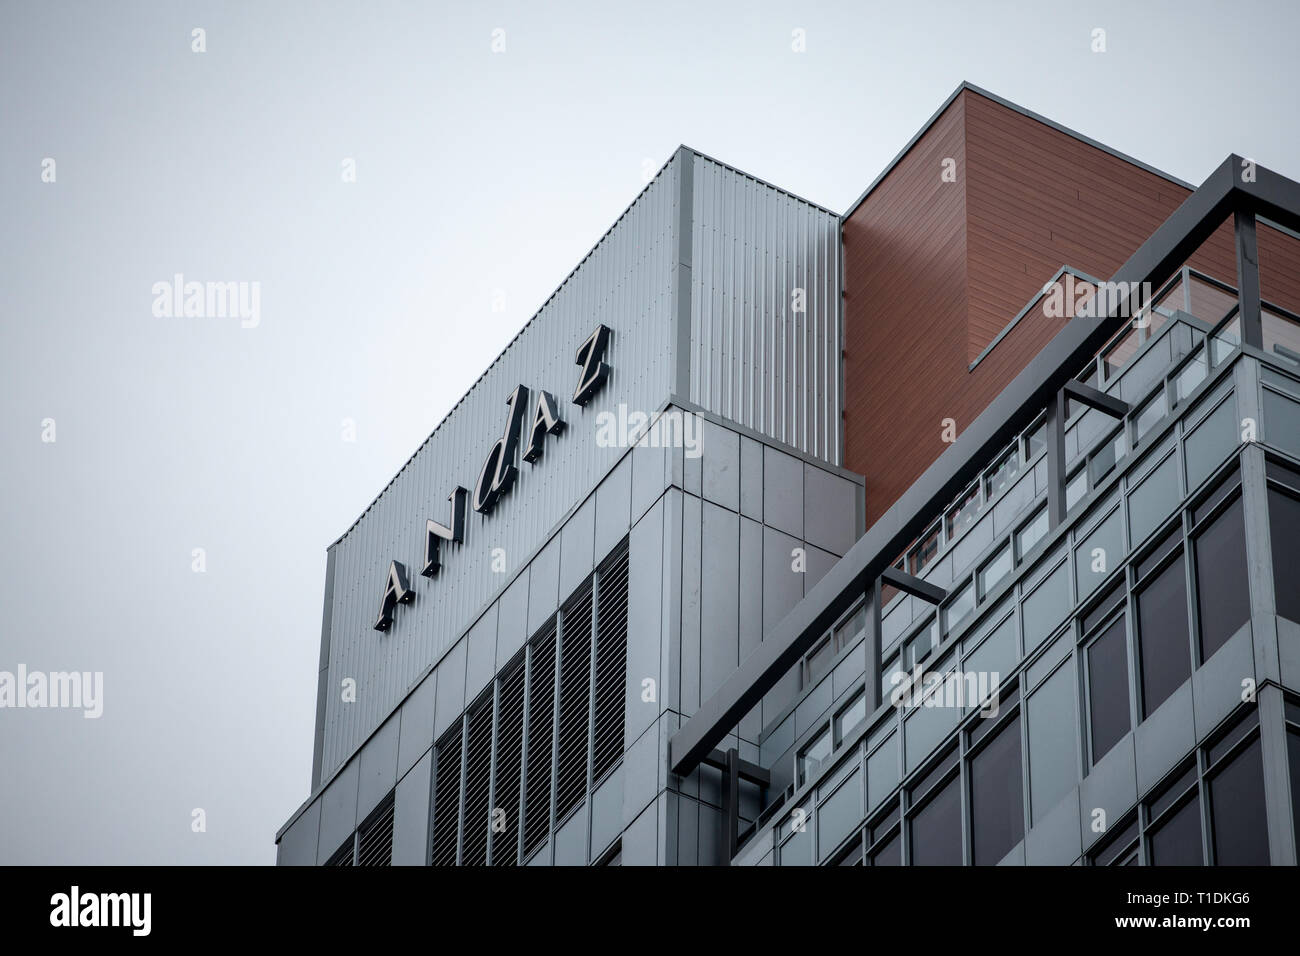 OTTAWA, CANADA - NOVEMBER 12, 2018: Andaz logo on their hotel for Ottawa, ONtario. Part of Hyatt, Andaz is a brand of boutique hotels spread worldwide Stock Photo